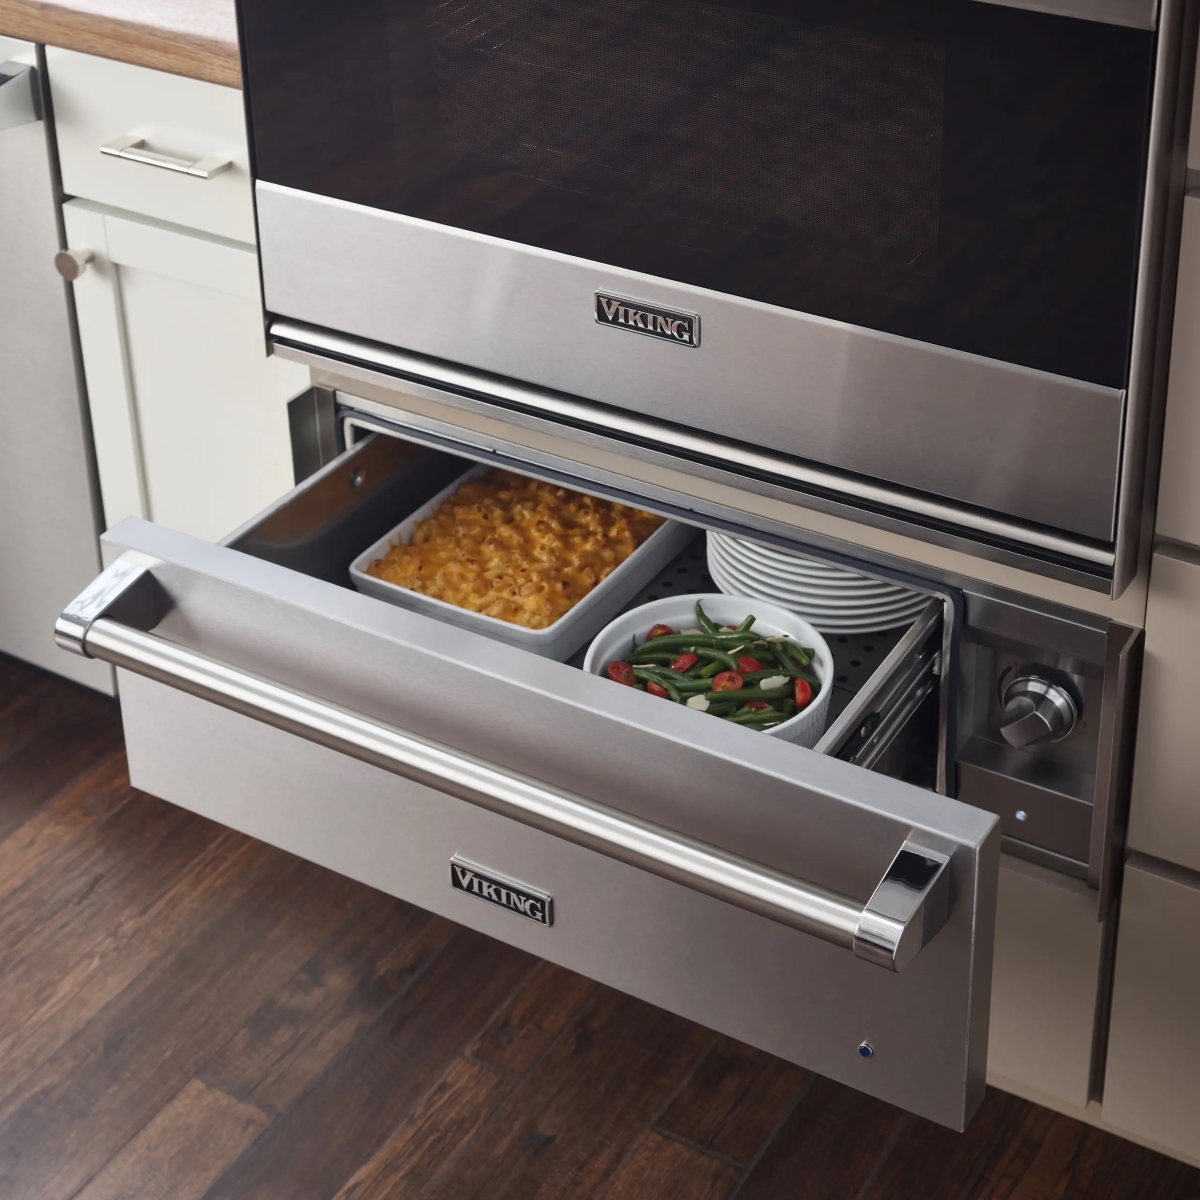 Silver oven warming drawer with dishes of food